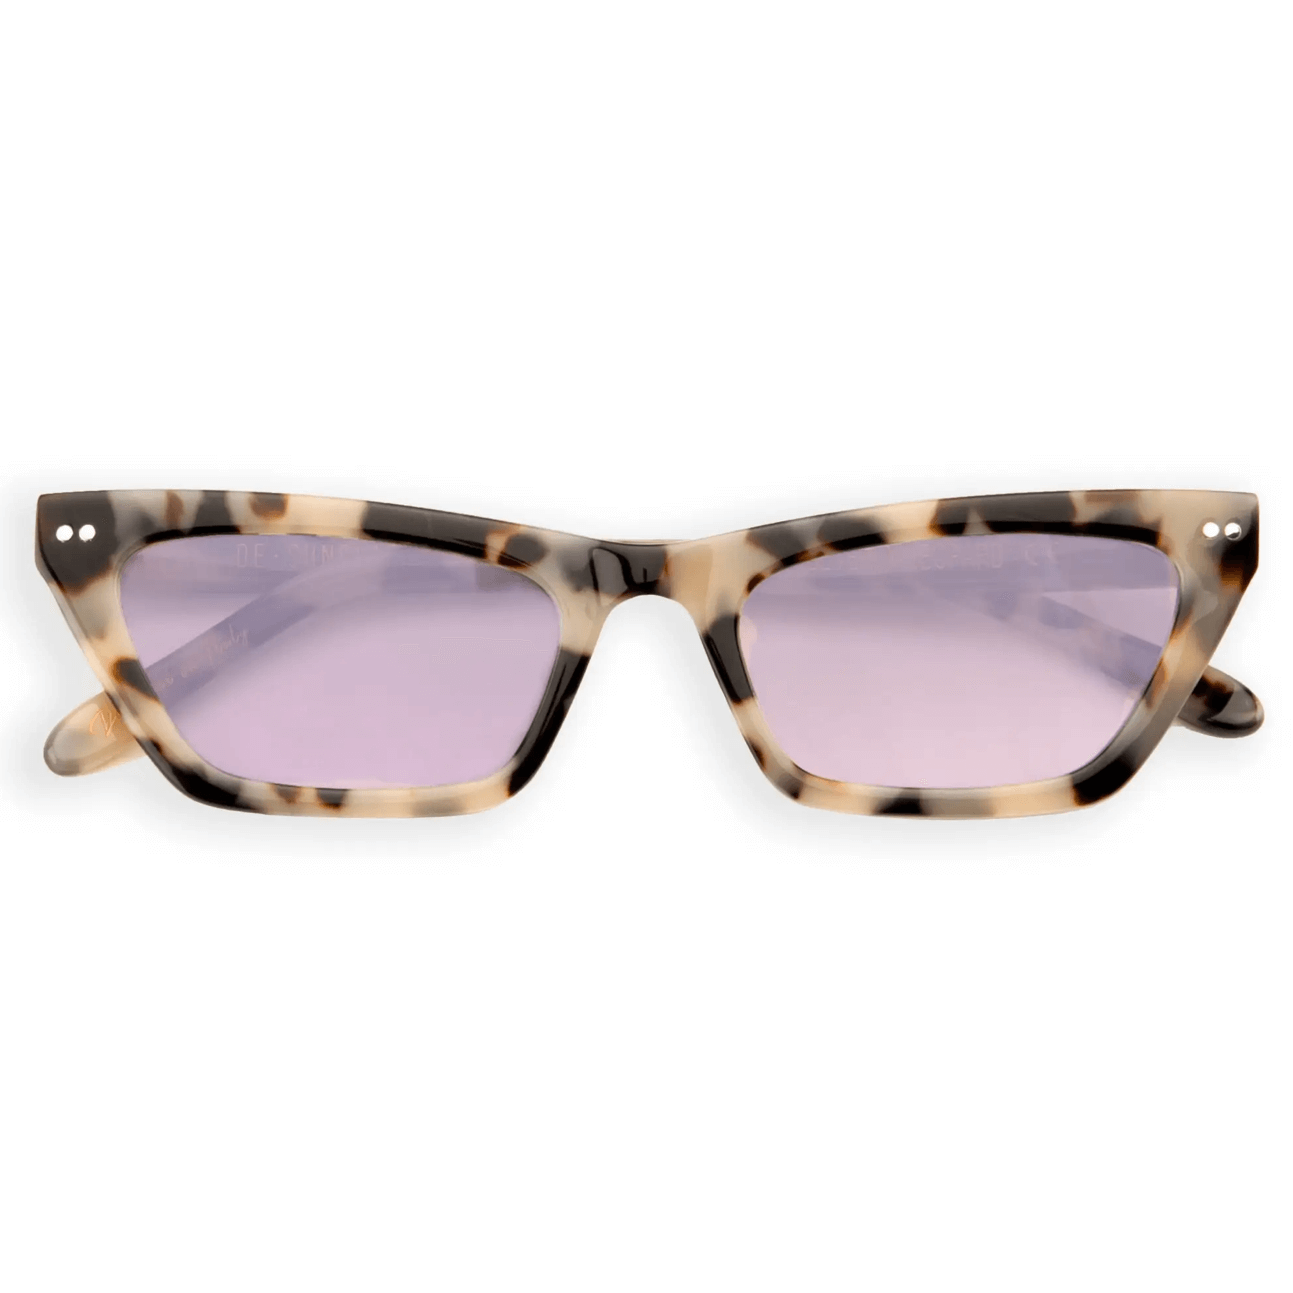 Beverly Leopard Sunglasses - Skies For Miles